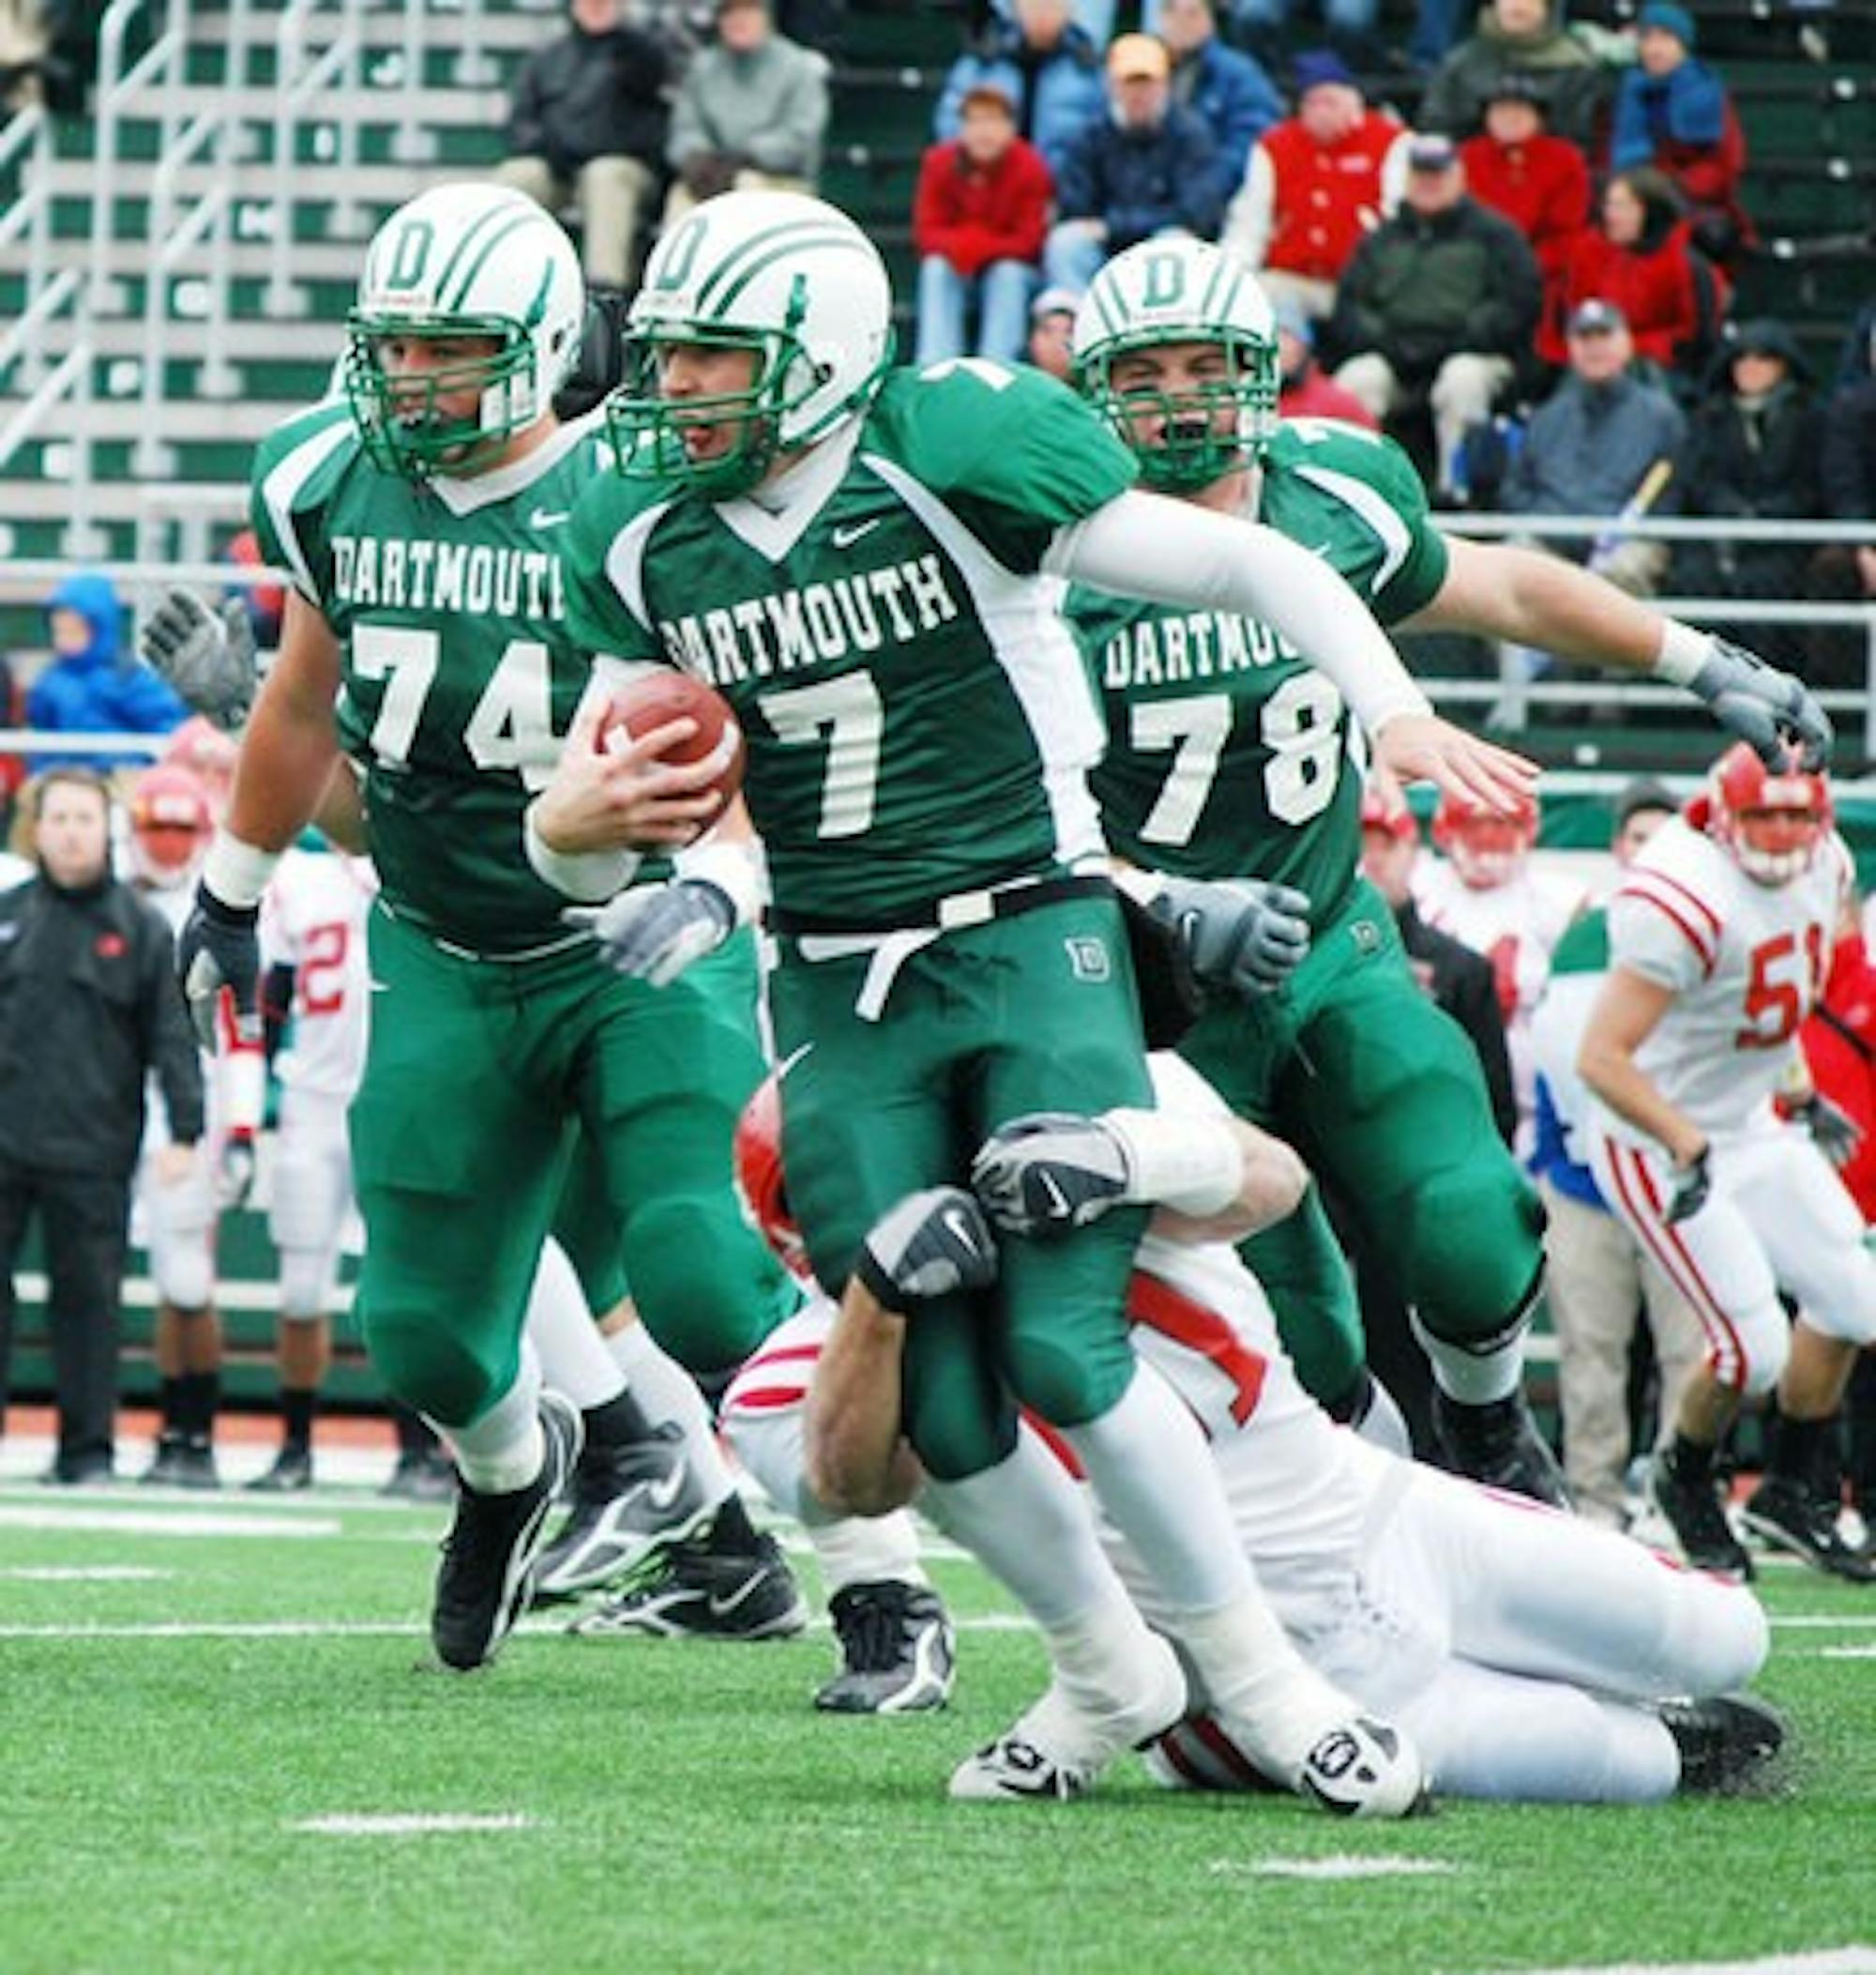 Tom Bennewitz '08 should lead the Big Green to victory over Princeton.